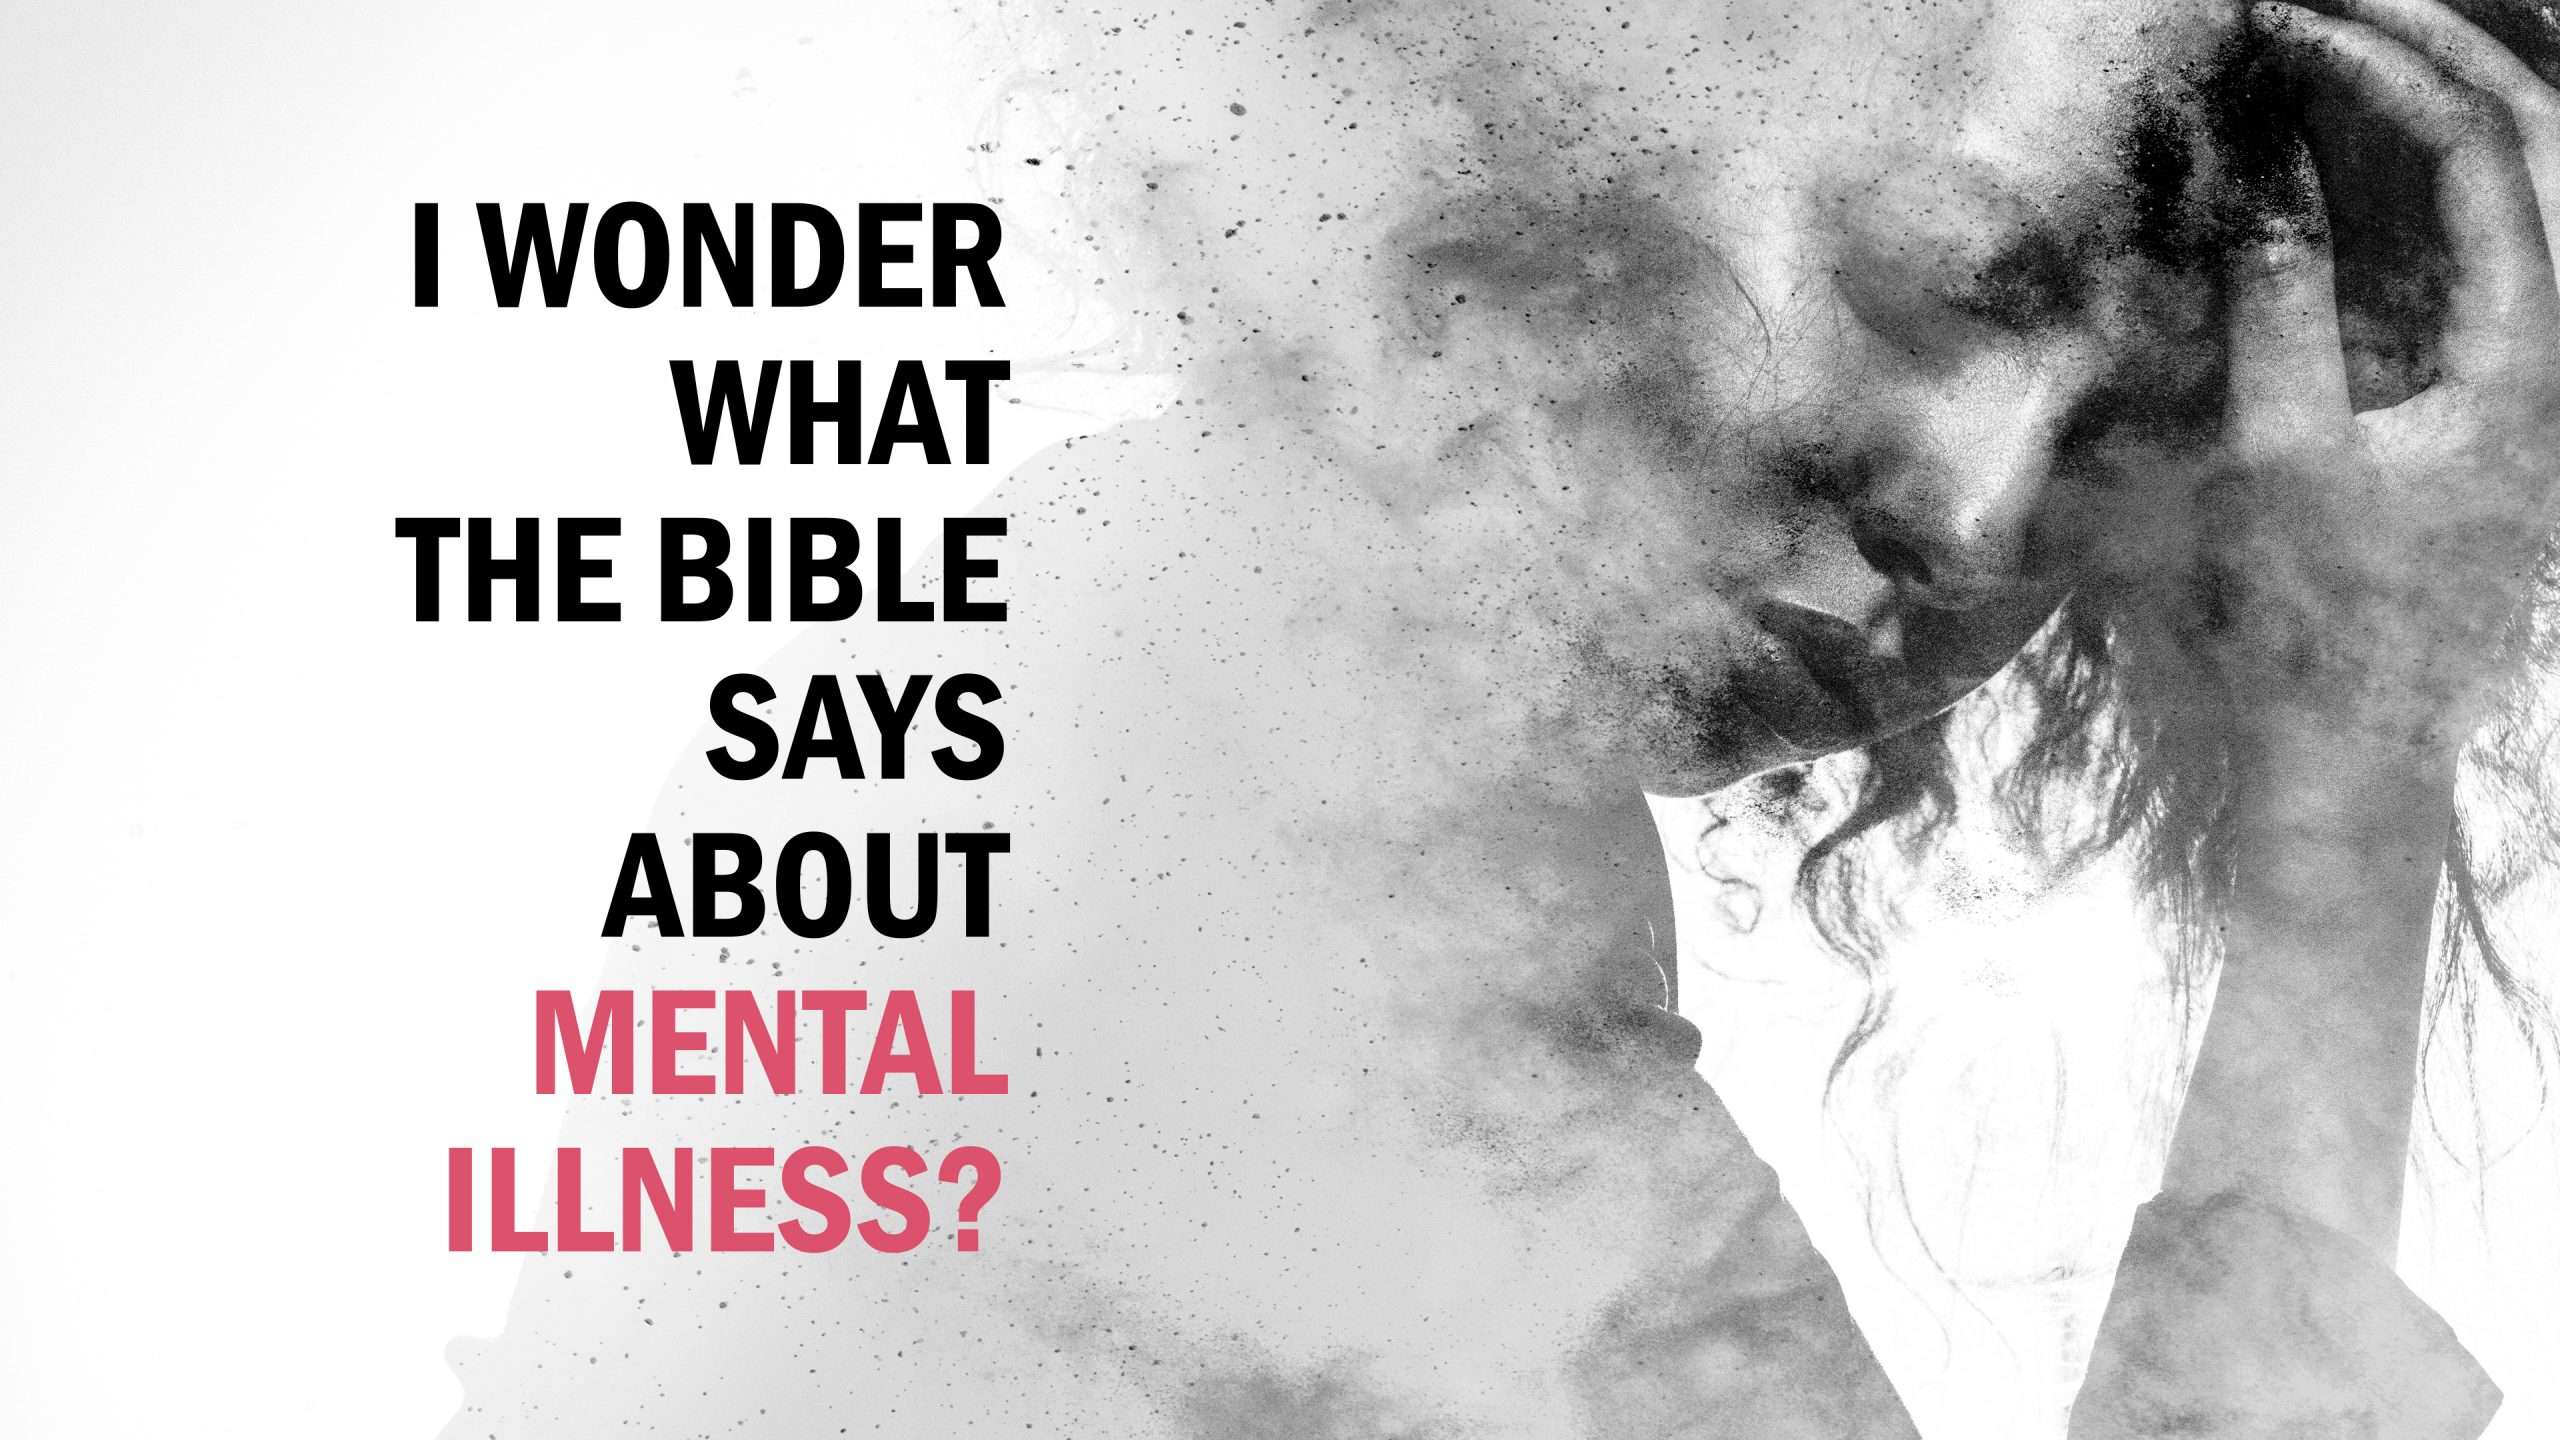 I Wonder What the Bible Says About Mental Illness?